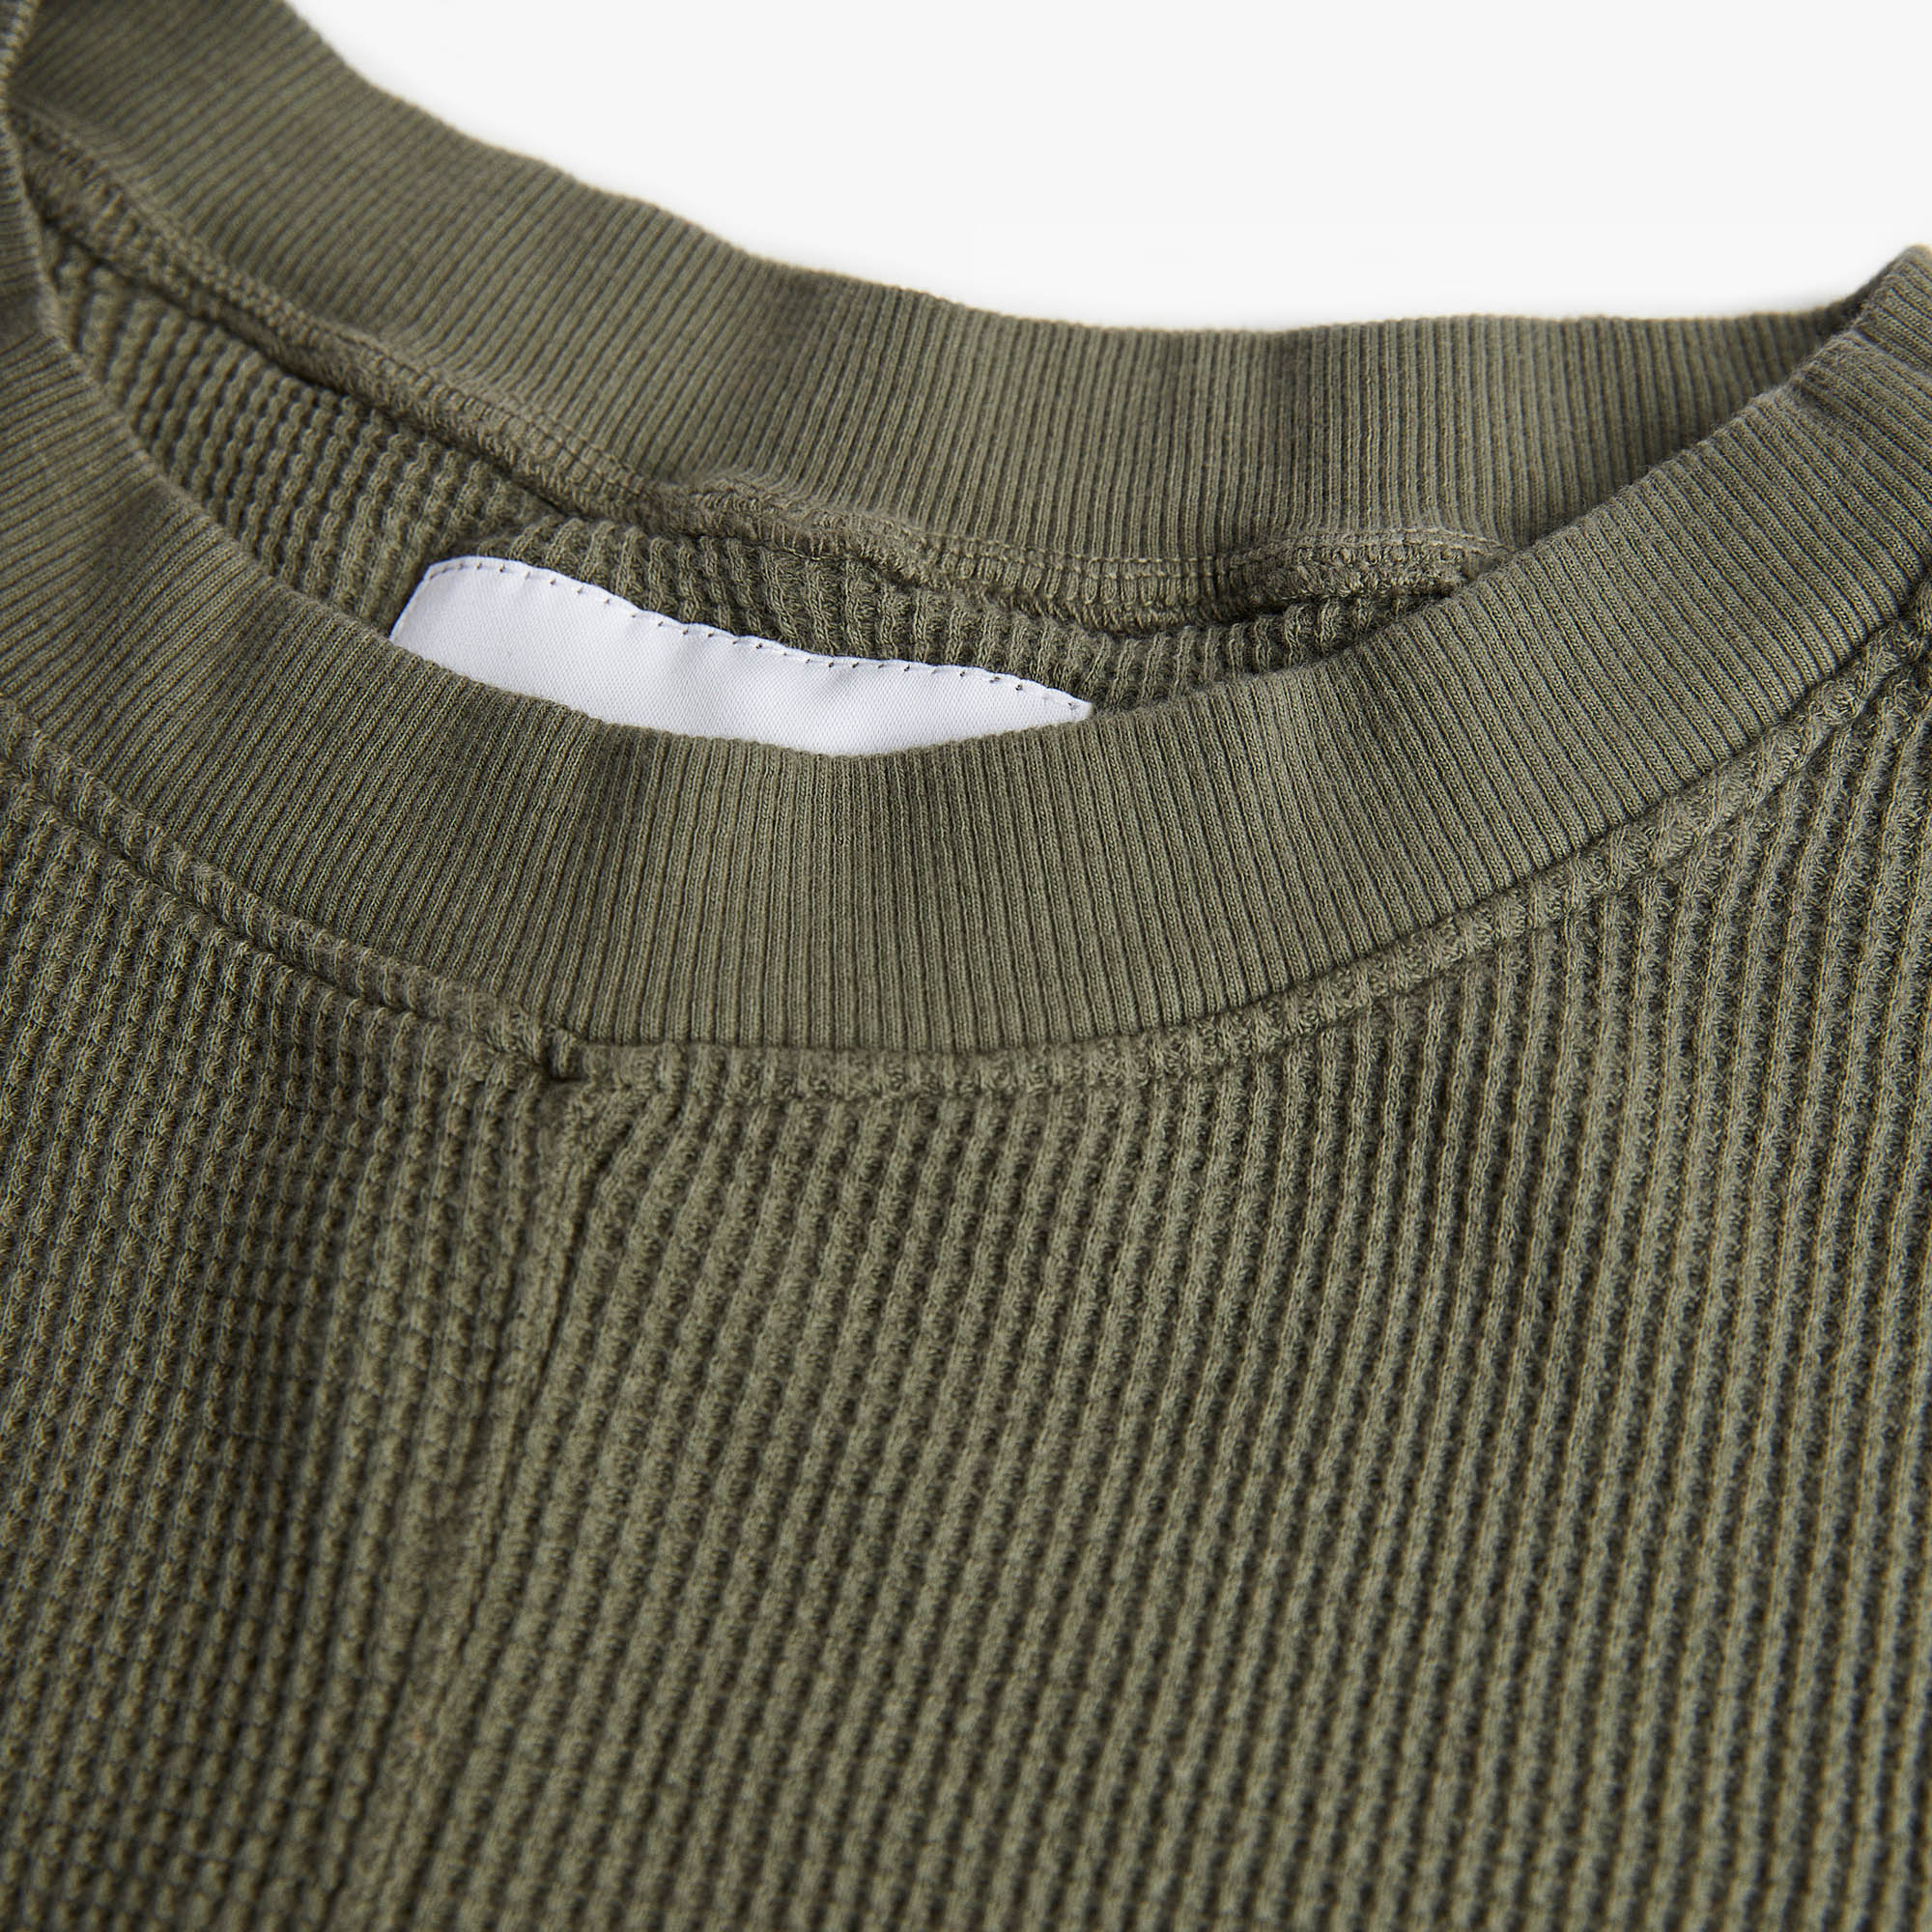 thermal standard tee / washed olive